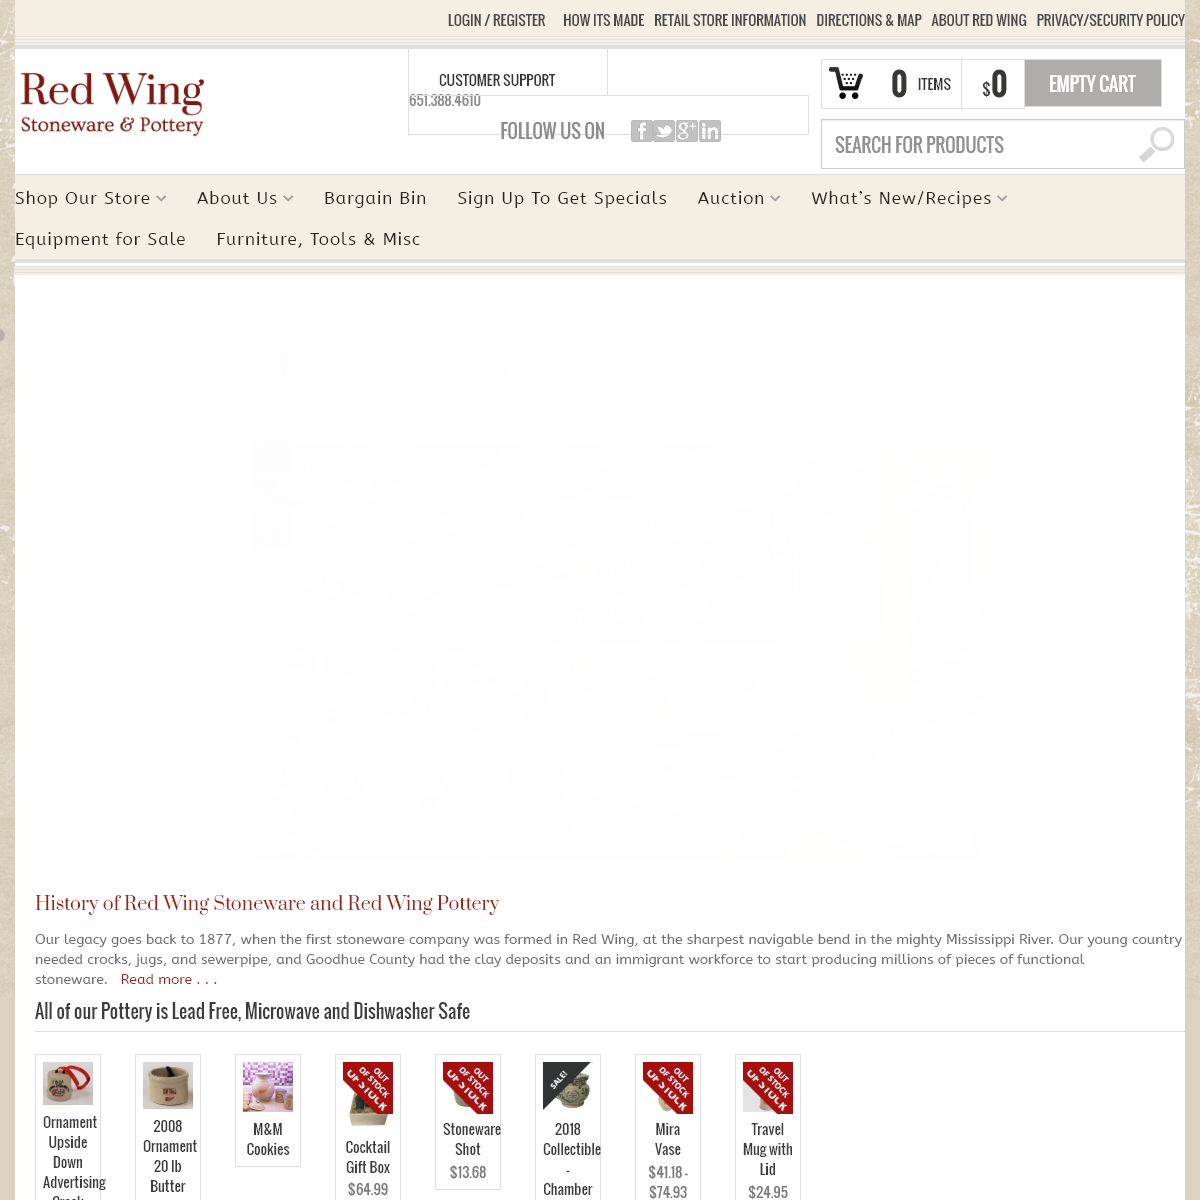 A complete backup of redwingstoneware.com